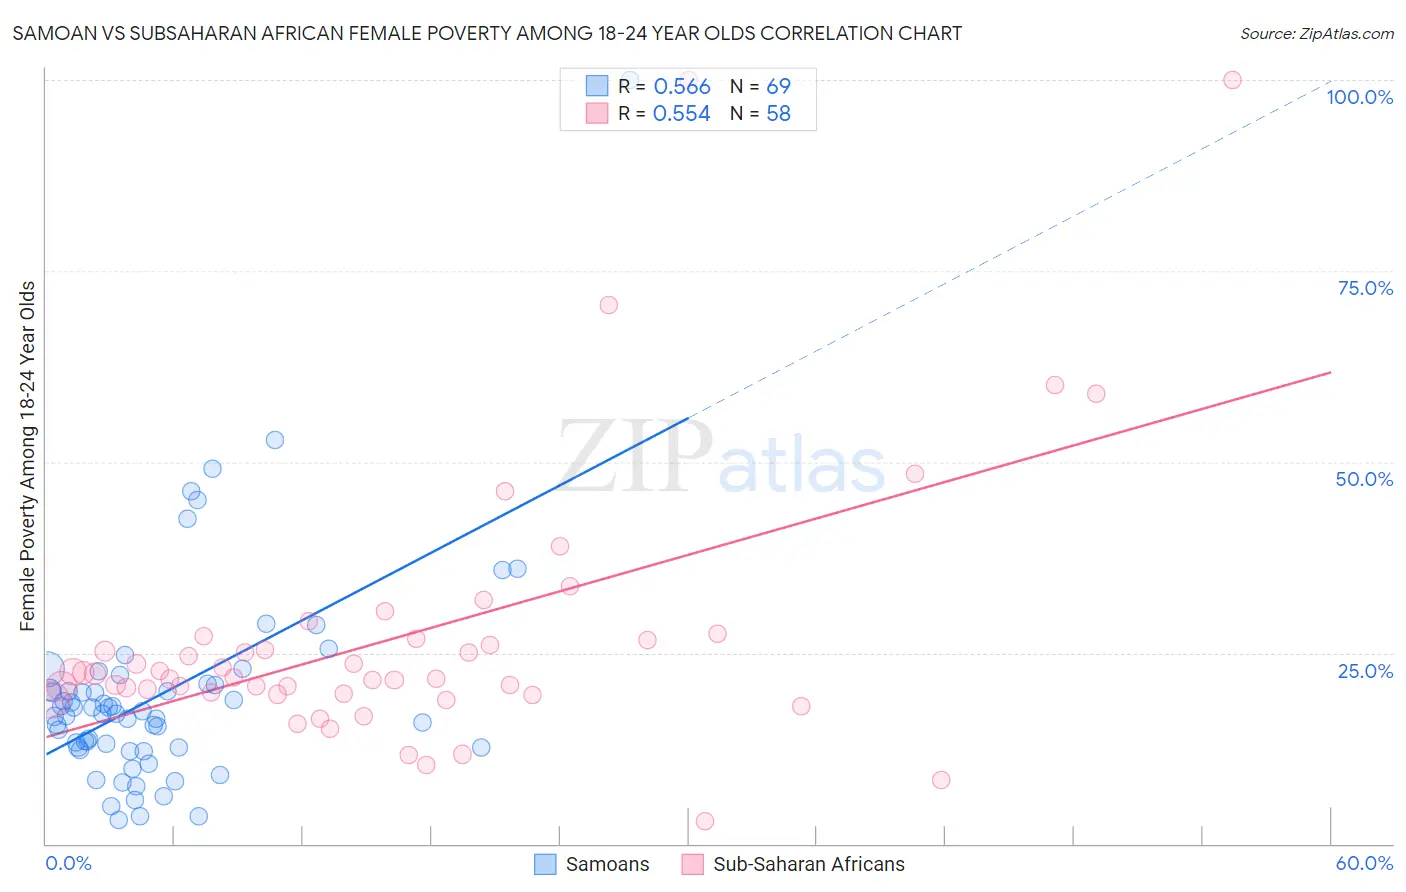 Samoan vs Subsaharan African Female Poverty Among 18-24 Year Olds